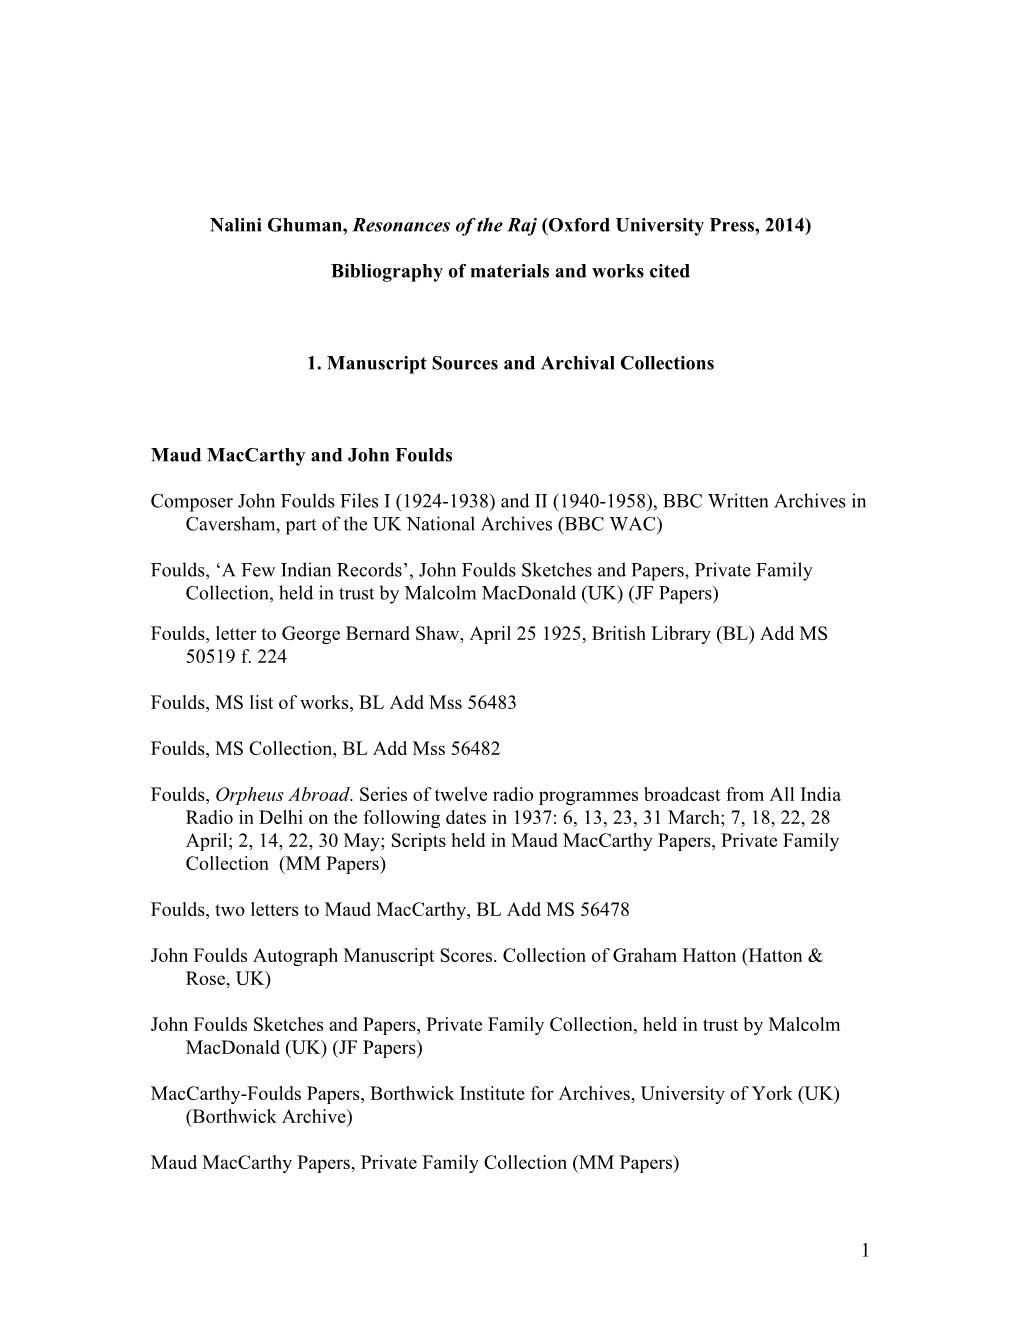 Bibliography of Materials and Works Cited